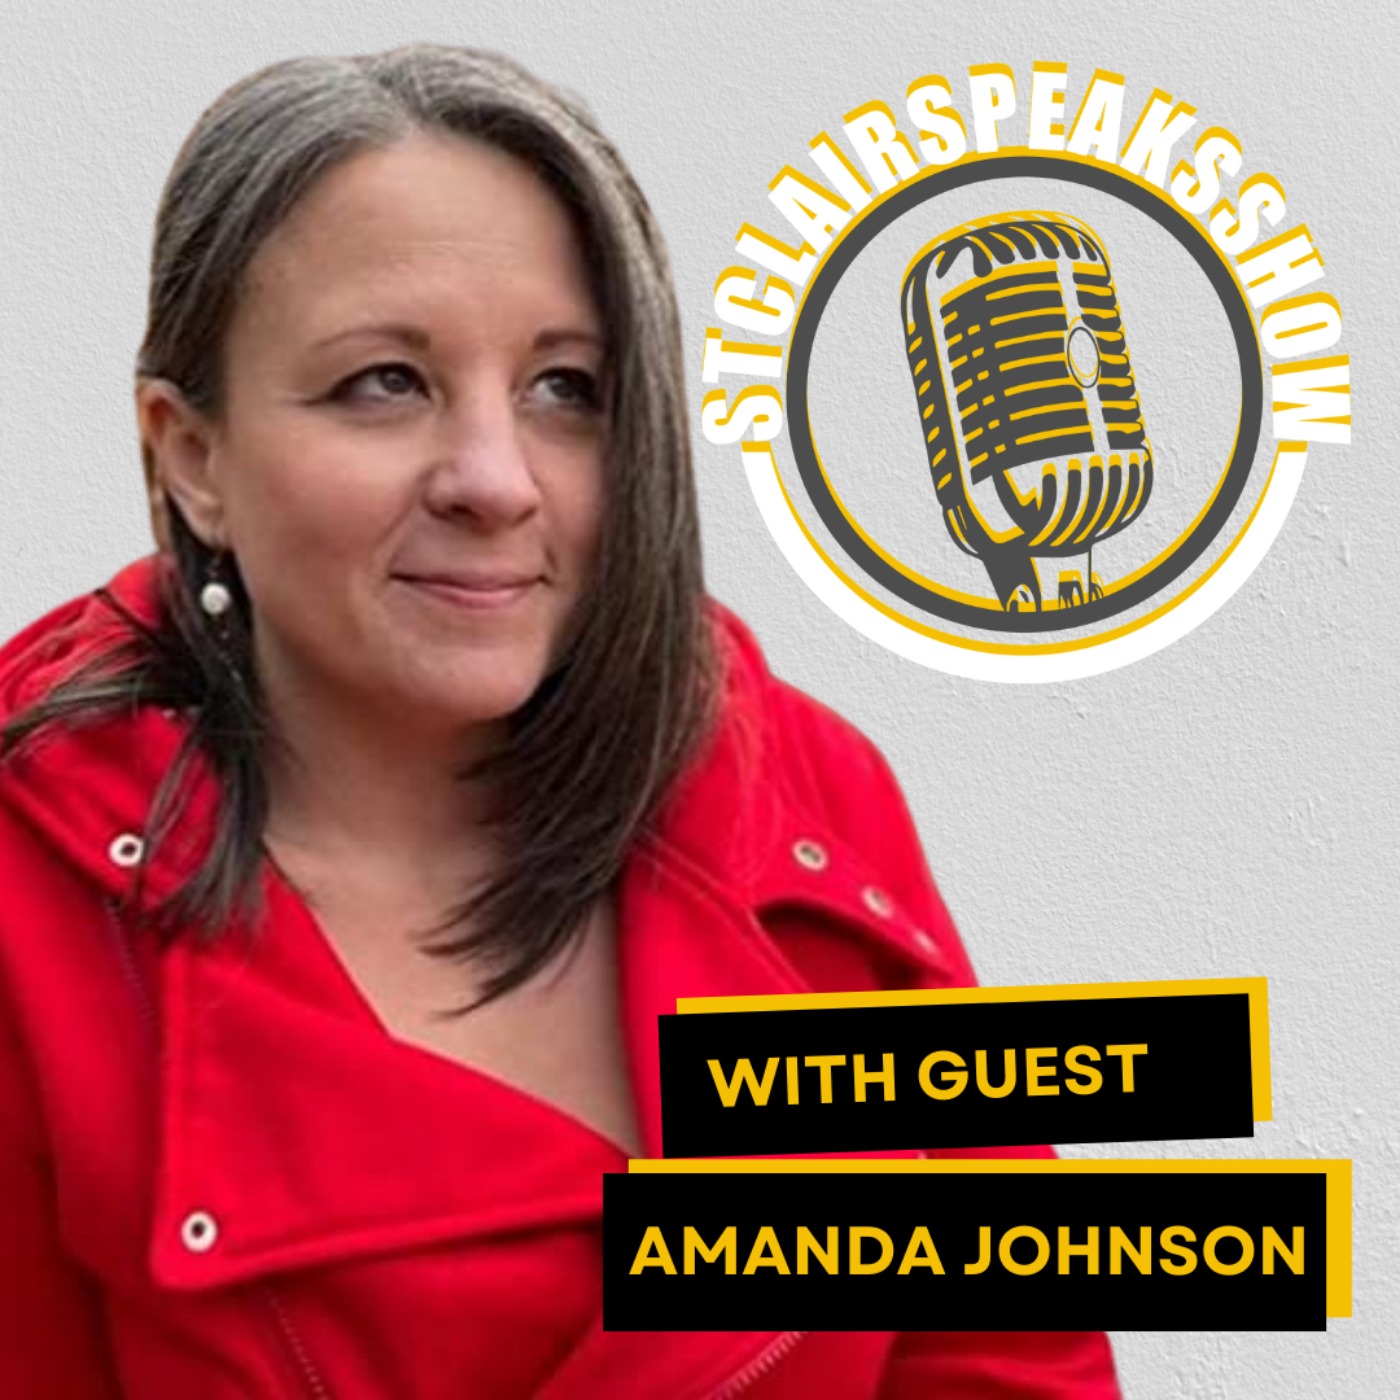 The StclairSpeaksShow Podcast with Amanda Johnson - Why Your Story Matters? | How Can Books Help Grow A Business Or Brand? Image